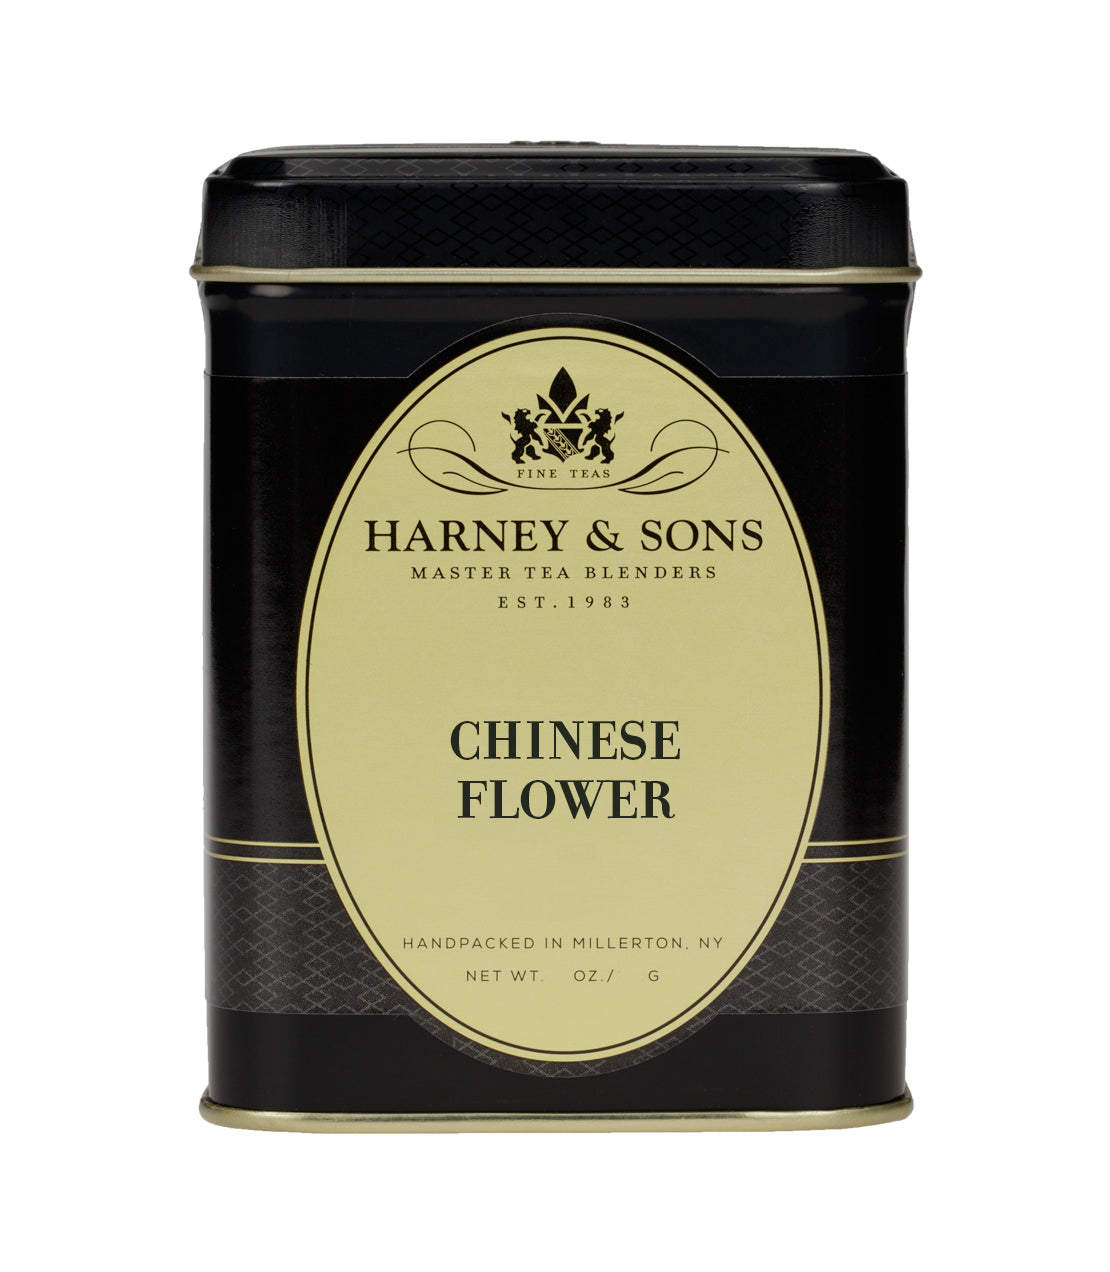 Chinese Flower - Loose 3.5 oz. Tin - Harney & Sons Fine Teas